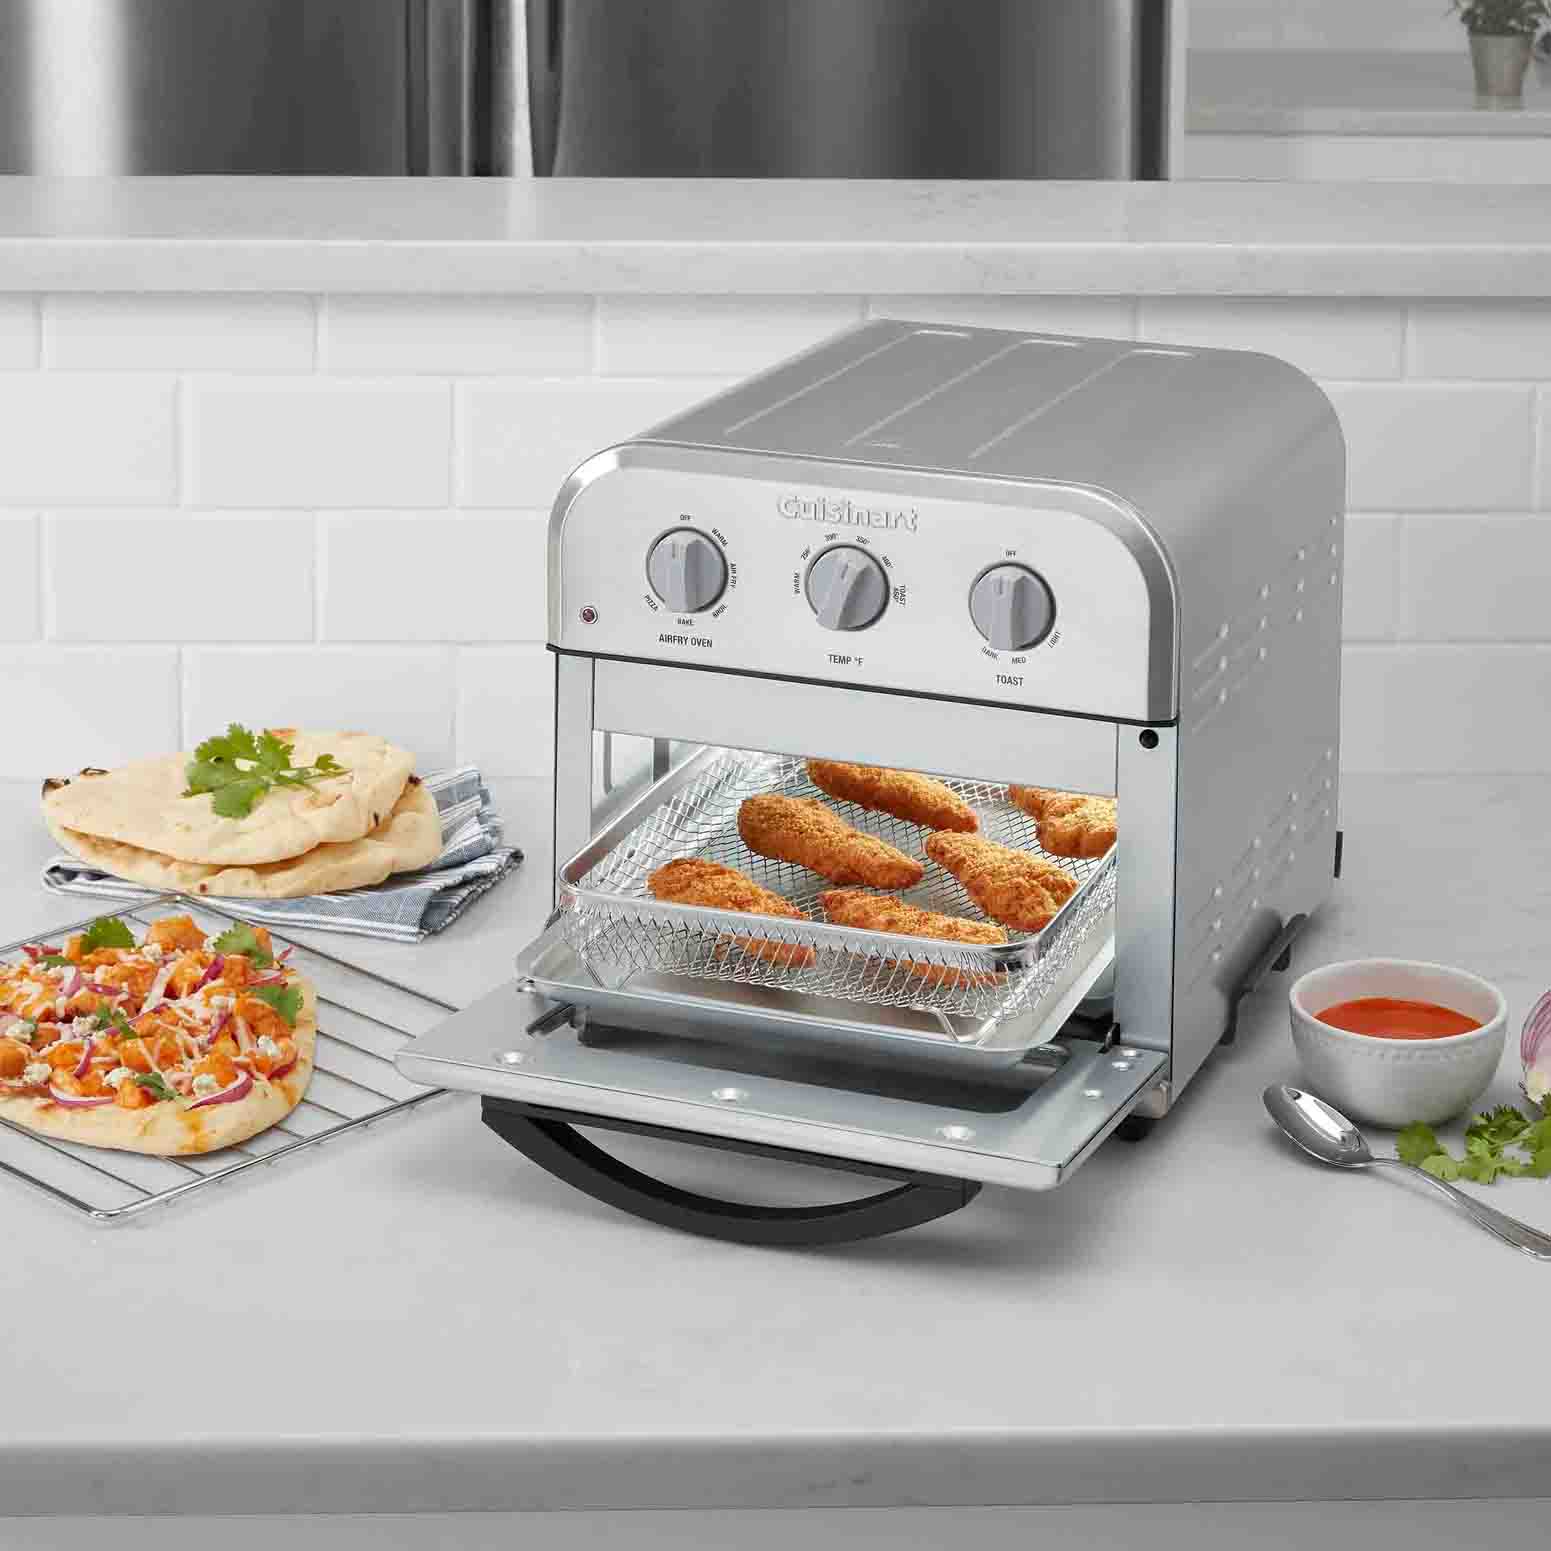 Silver air fryer on countertop with prepared food